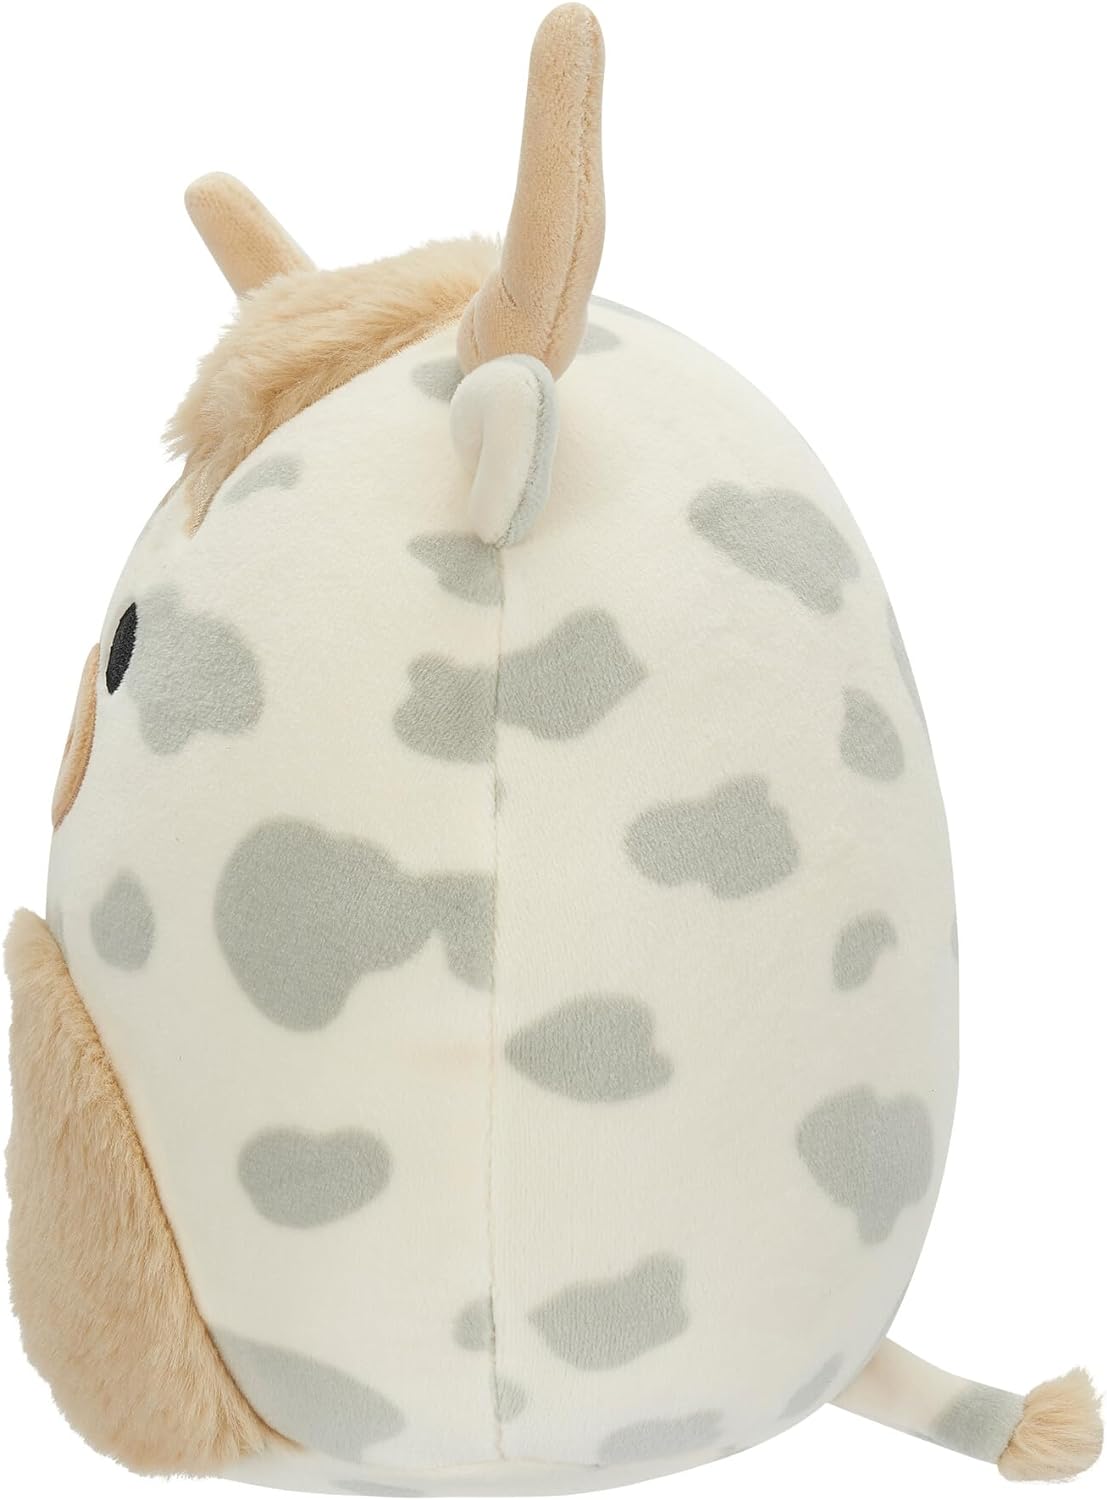 Little Plush (7.5 In Squishmallows) Grey Spotted Cow